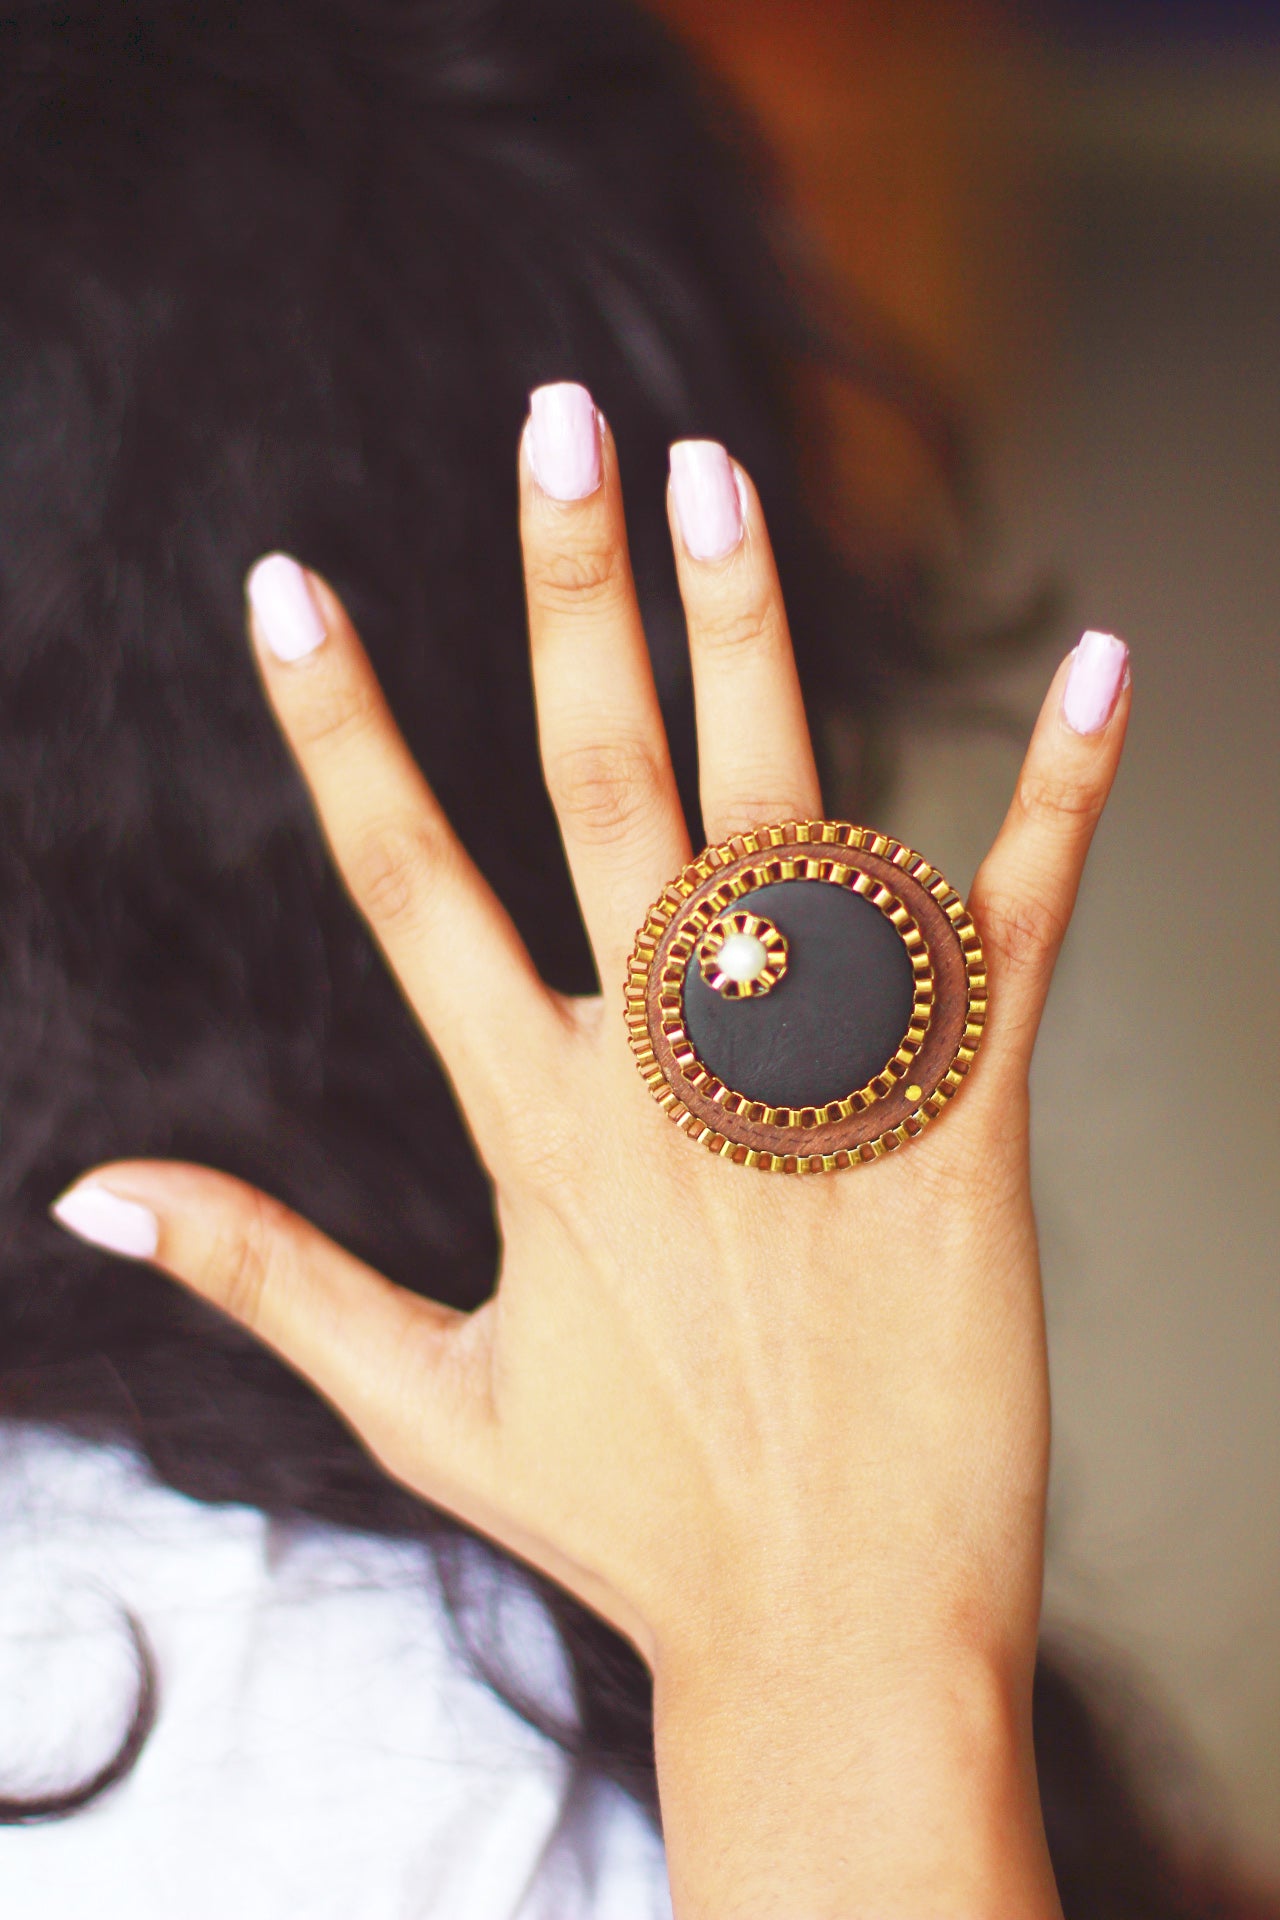 Black and Brown Beauty Ring